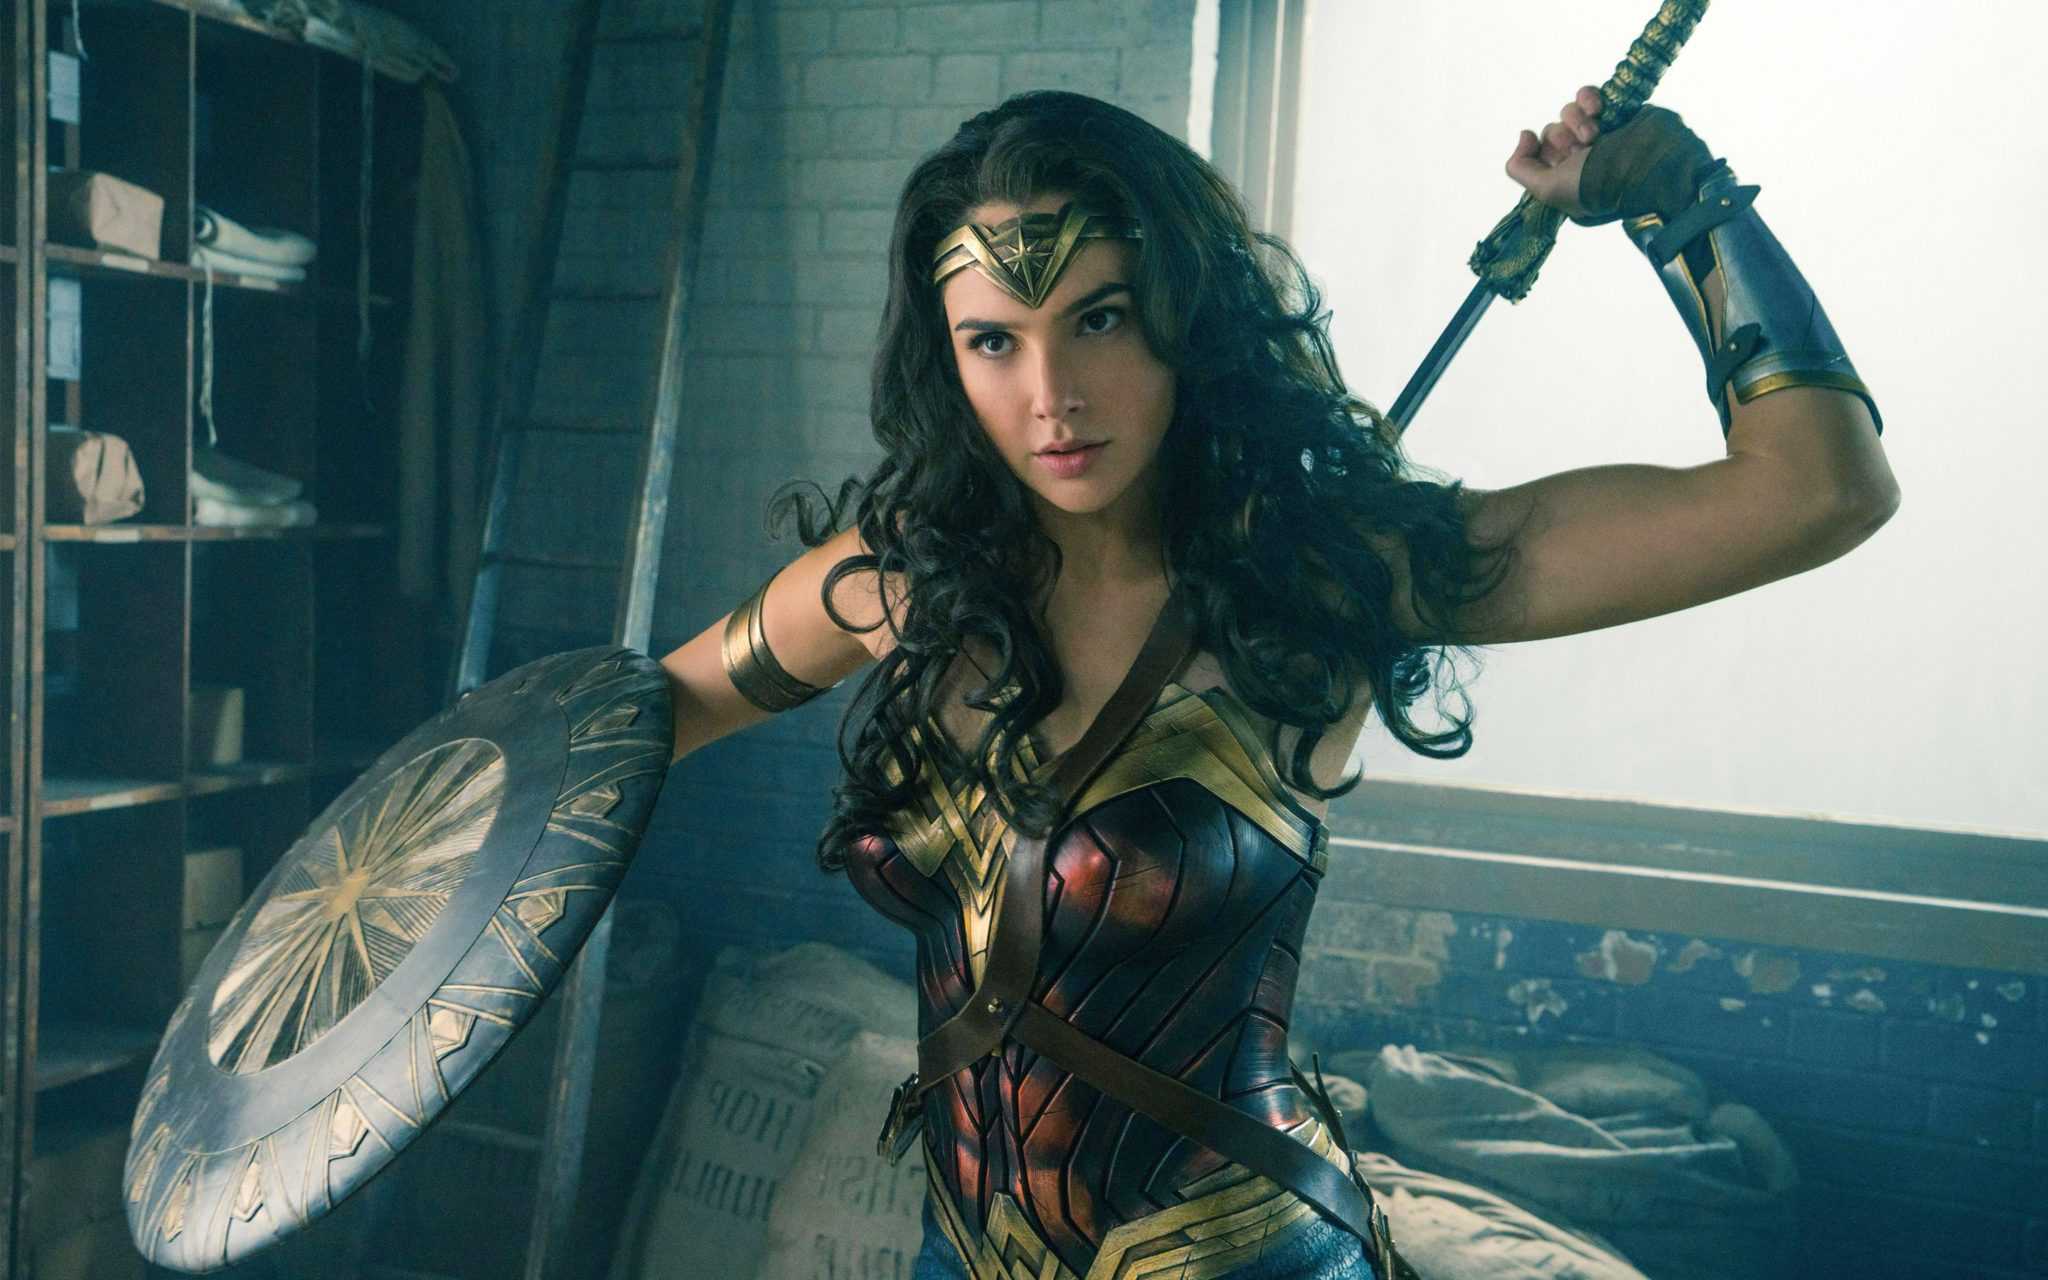 Some men are furious over a female-only 'Wonder Woman' screening